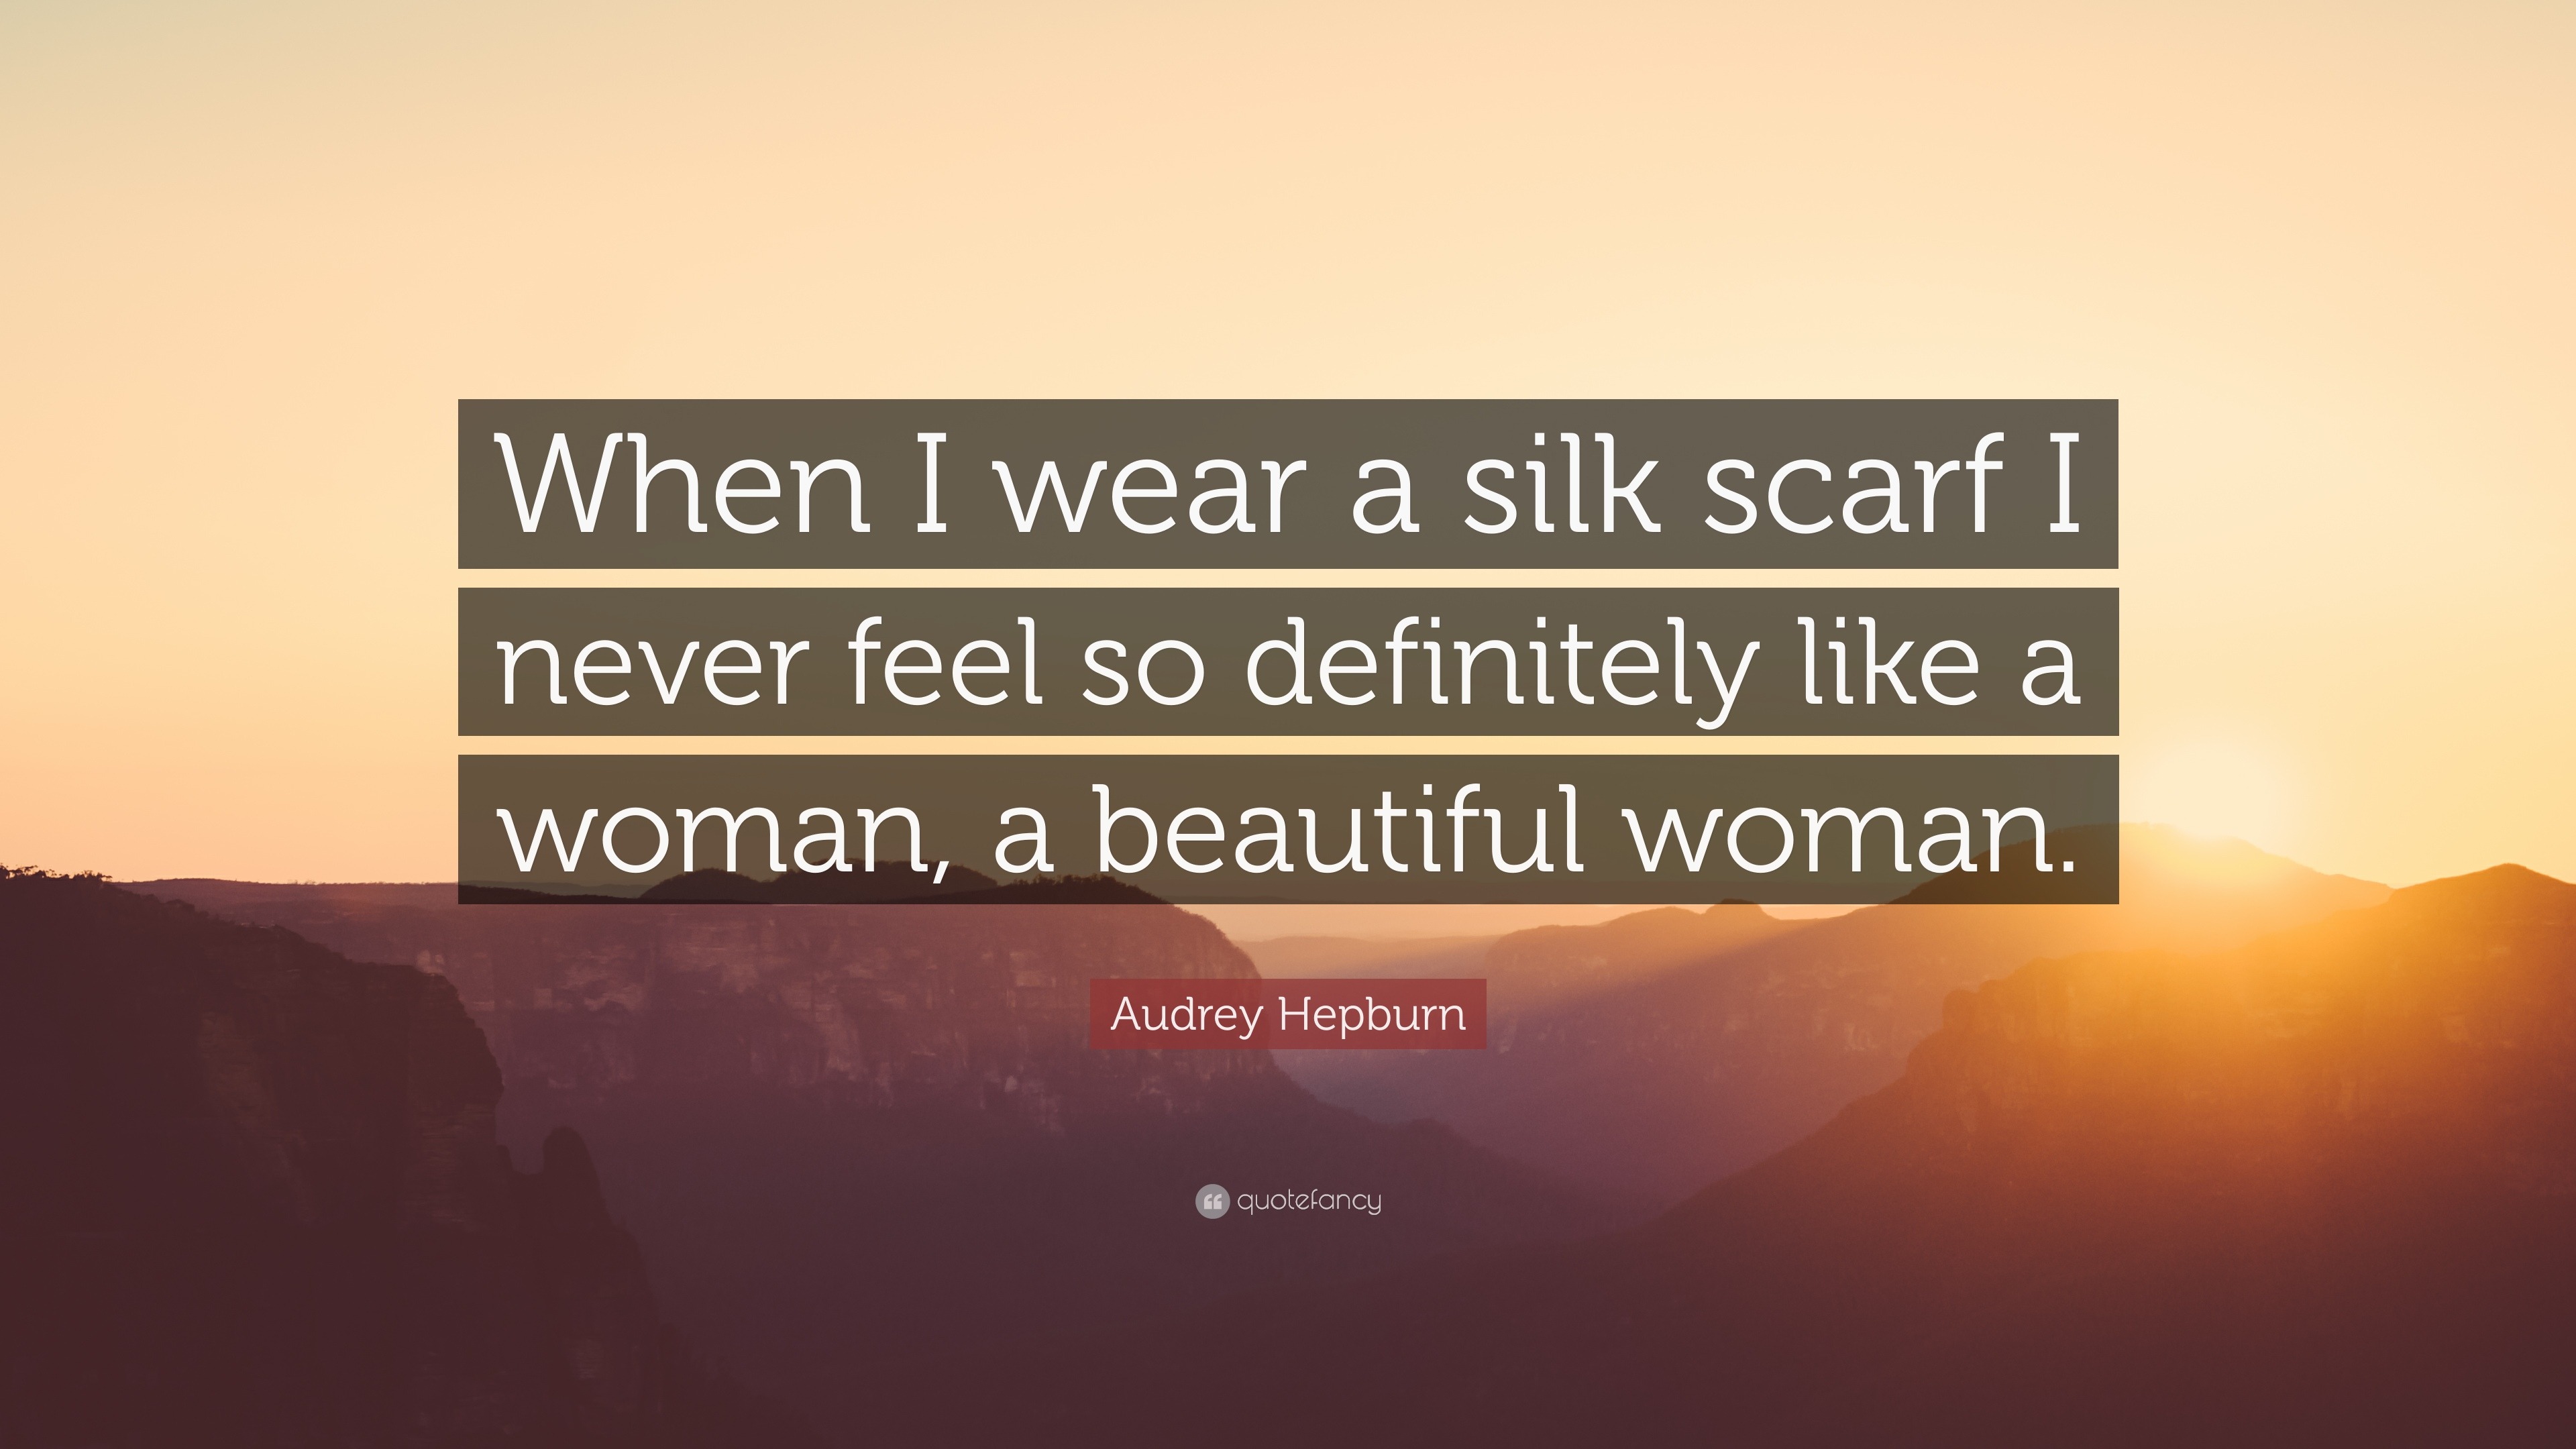 Audrey Hepburn Quote: “When I wear a silk scarf I never feel so ...